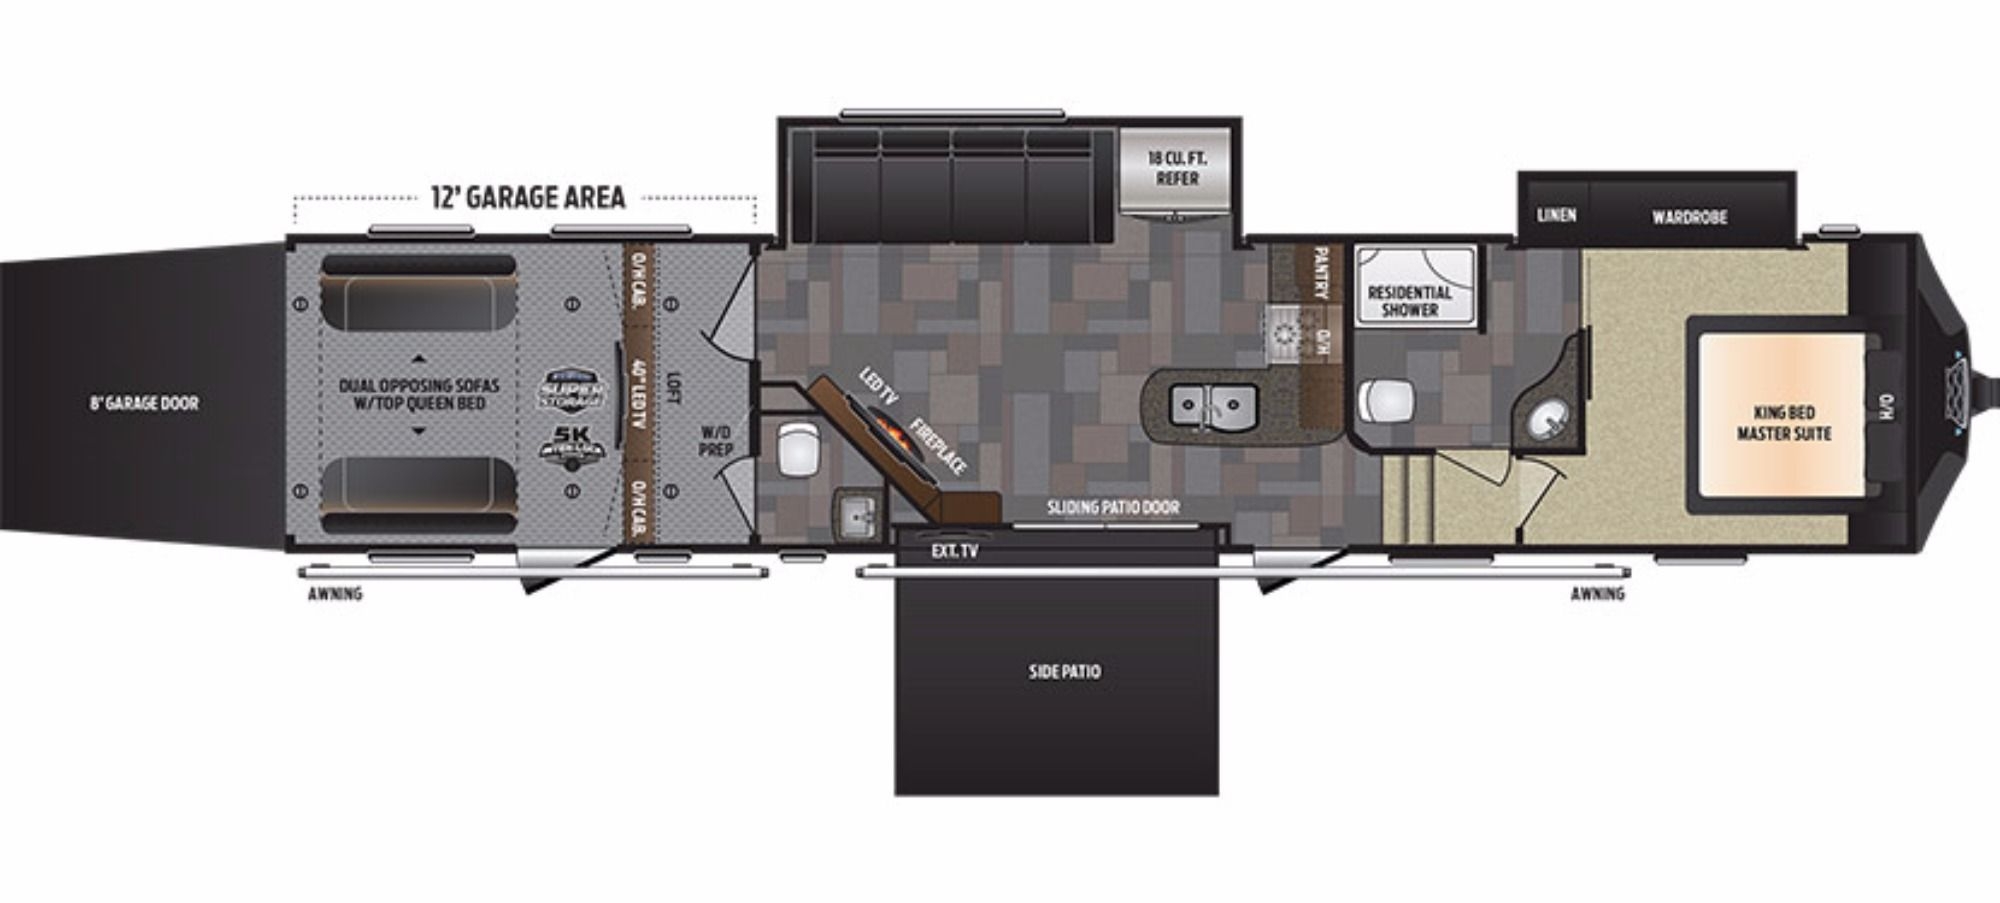 8 Pics Fuzion 5th Wheel Toy Hauler Floor Plans And Review